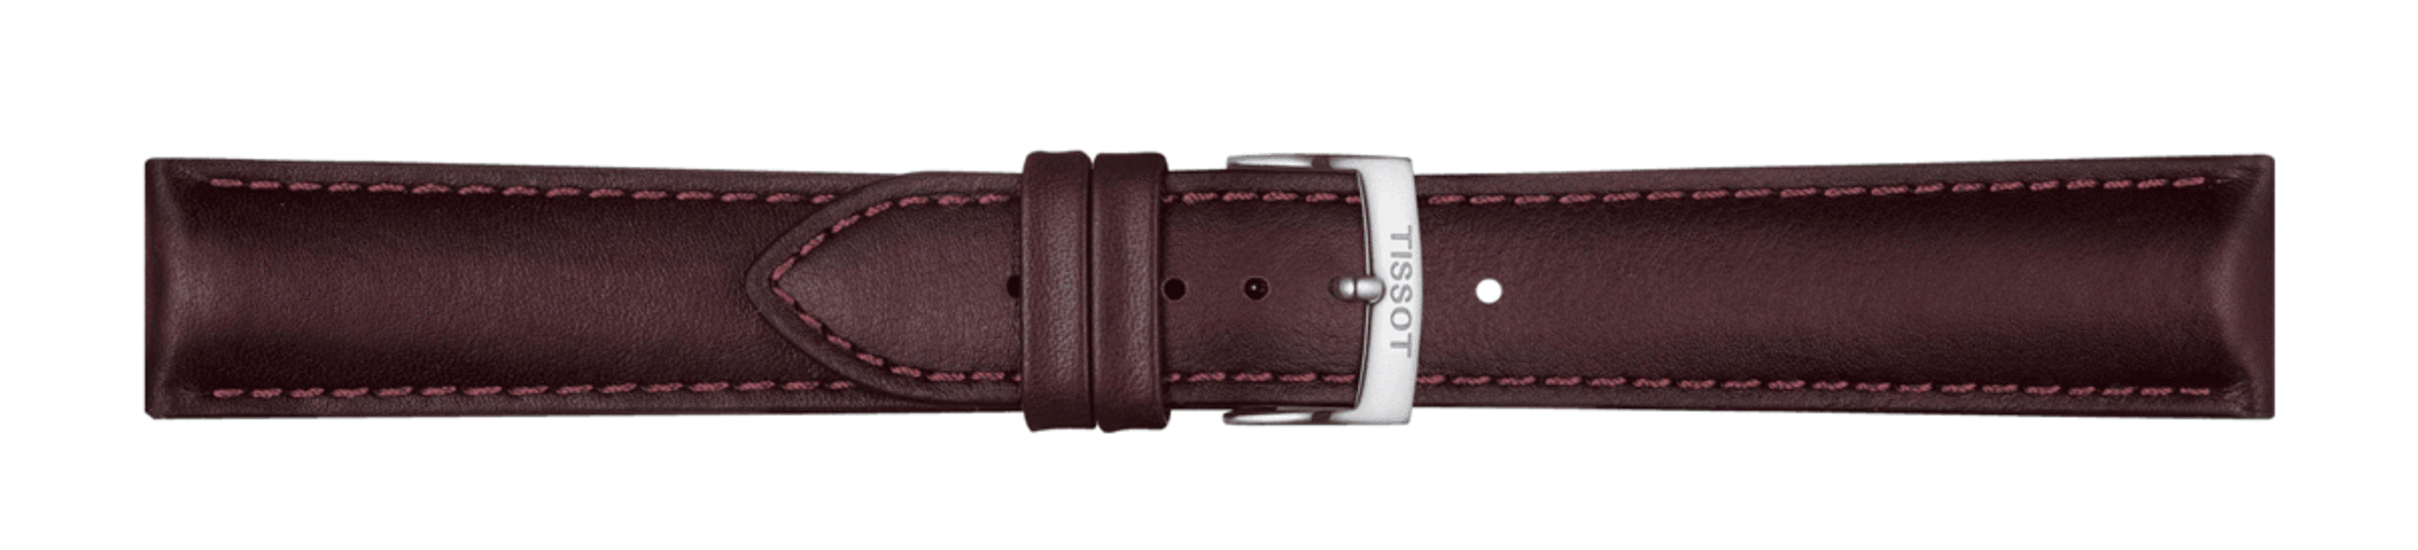 TISSOT T852.046.838 OFFICIAL BROWN LEATHER STRAP LUGS 20 MM